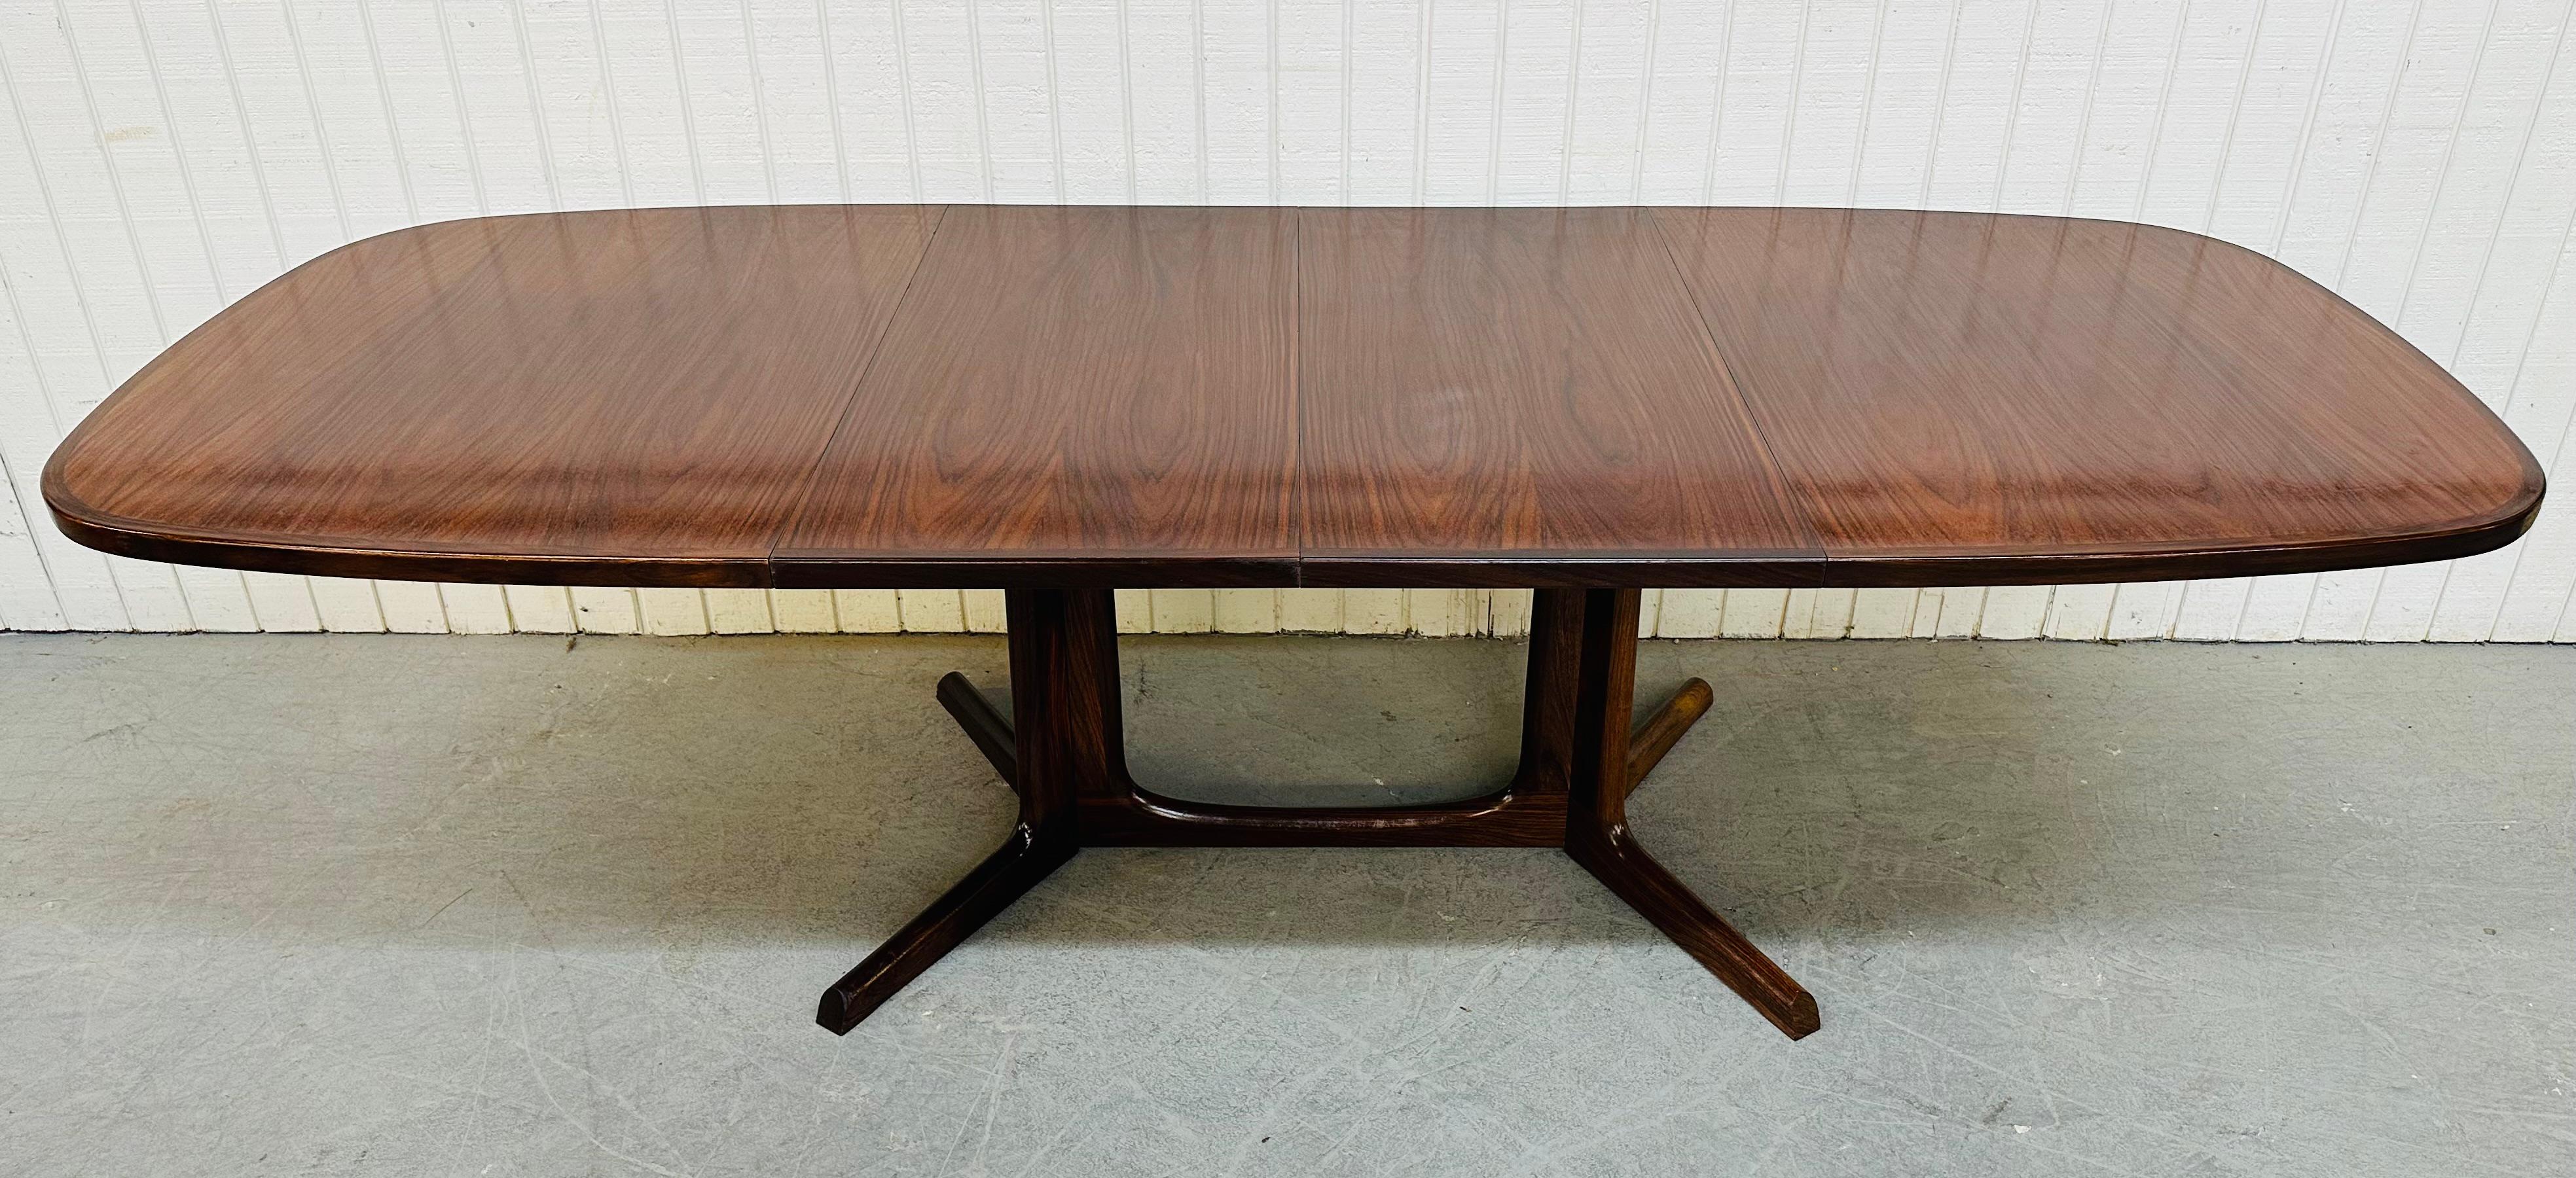 This listing is for a vintage Danish Modern Rosewood Dining Table. Featuring a slightly rounded banded rosewood top that extends up to 102” L with both 19” leafs inserted, a rosewood double pedestal style center table base, and a beautiful rosewood